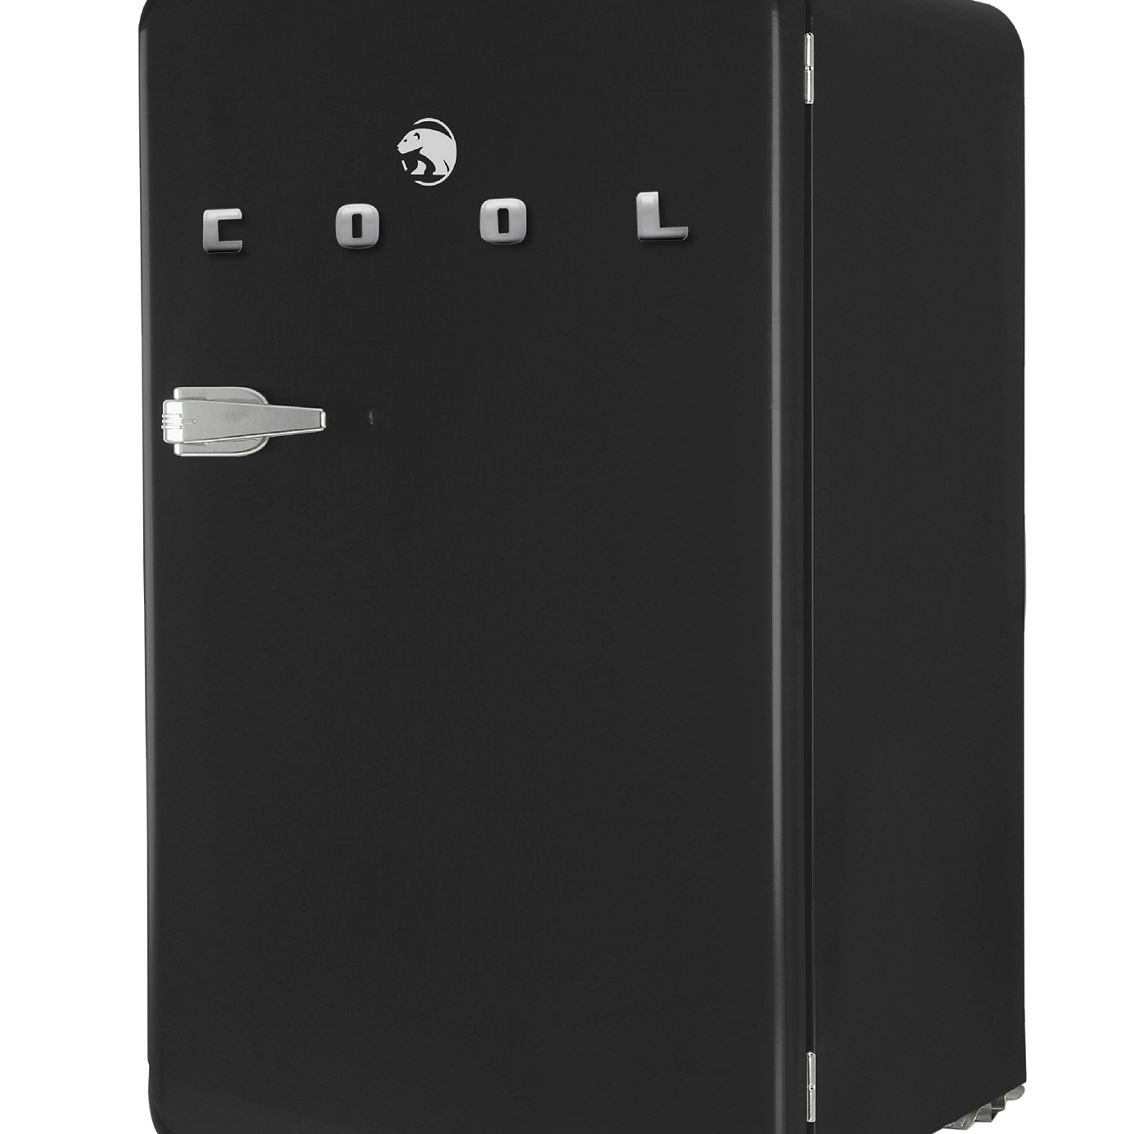 Commercial Cool 3.2 Cubic Foot Retro Refrigerator | Compact ...